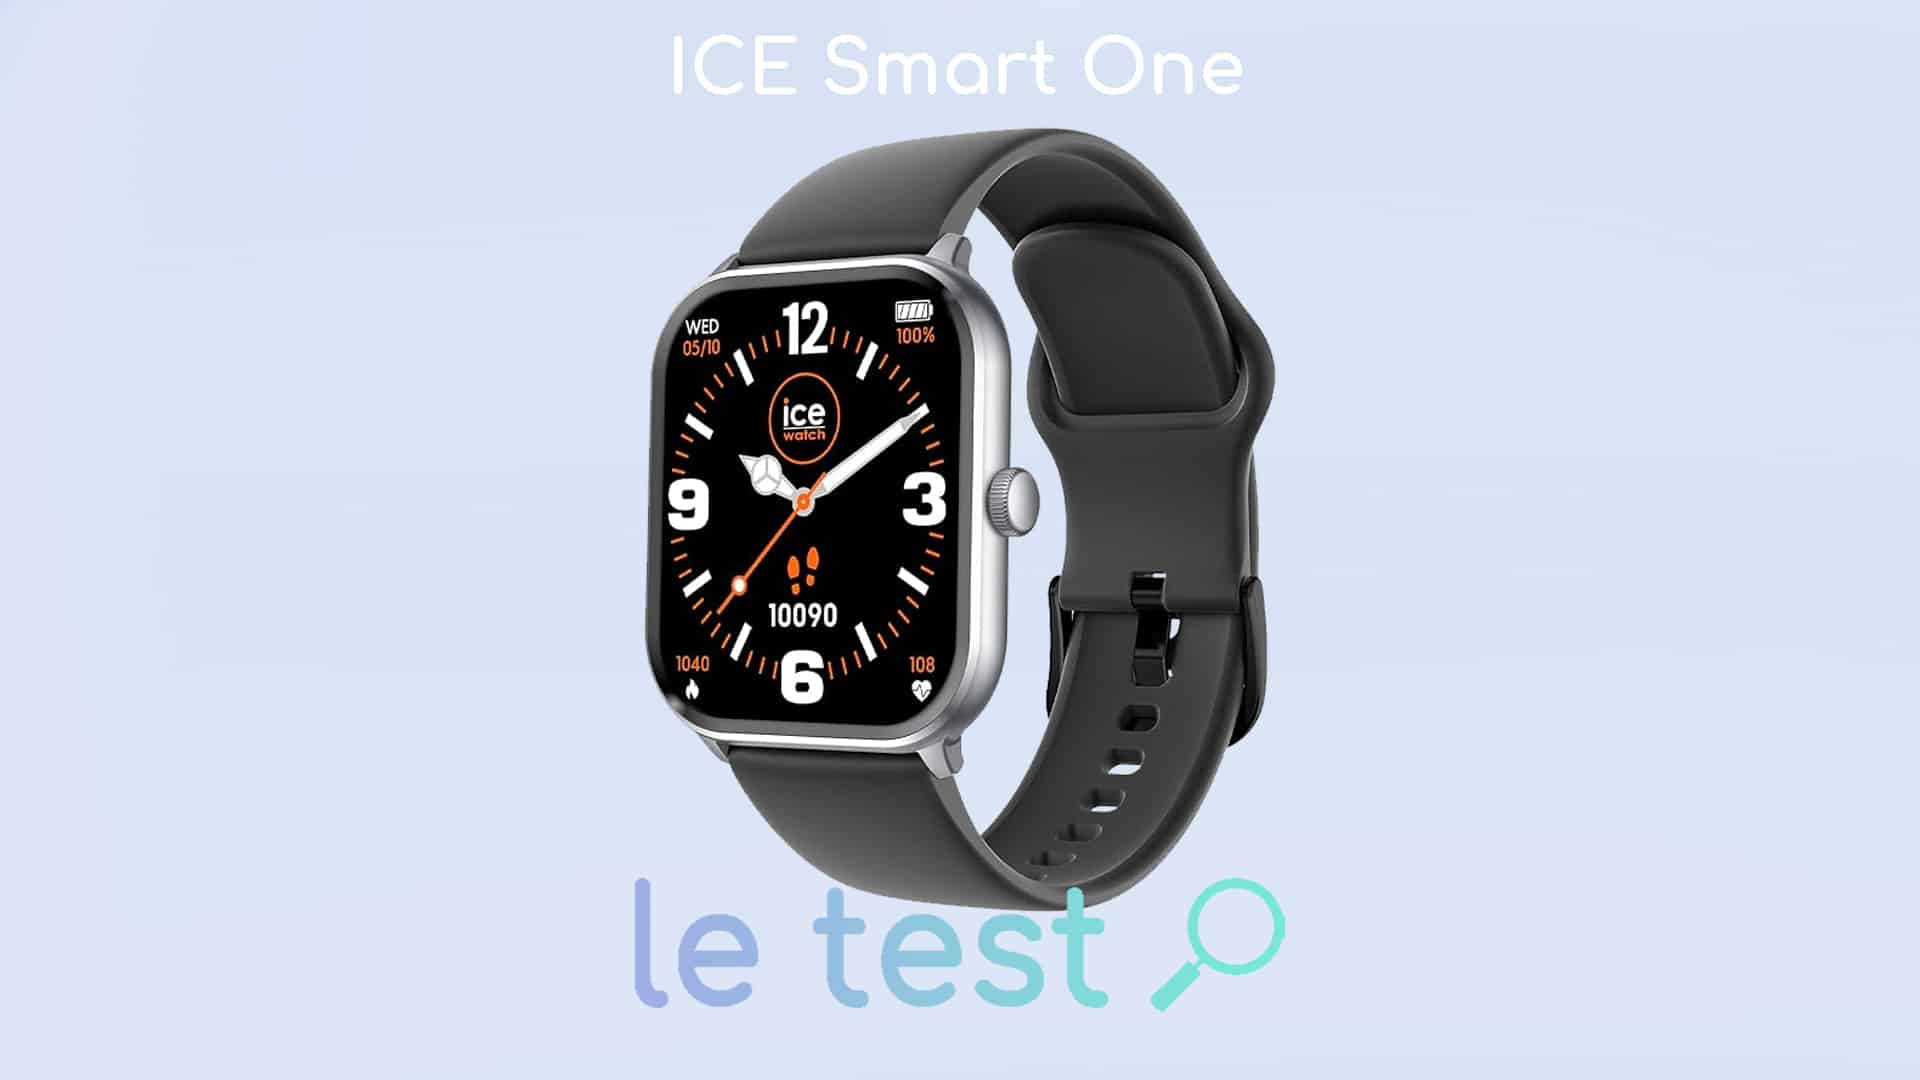 Testé pour vous: Ice-Watch Ice Smart One - Soirmag